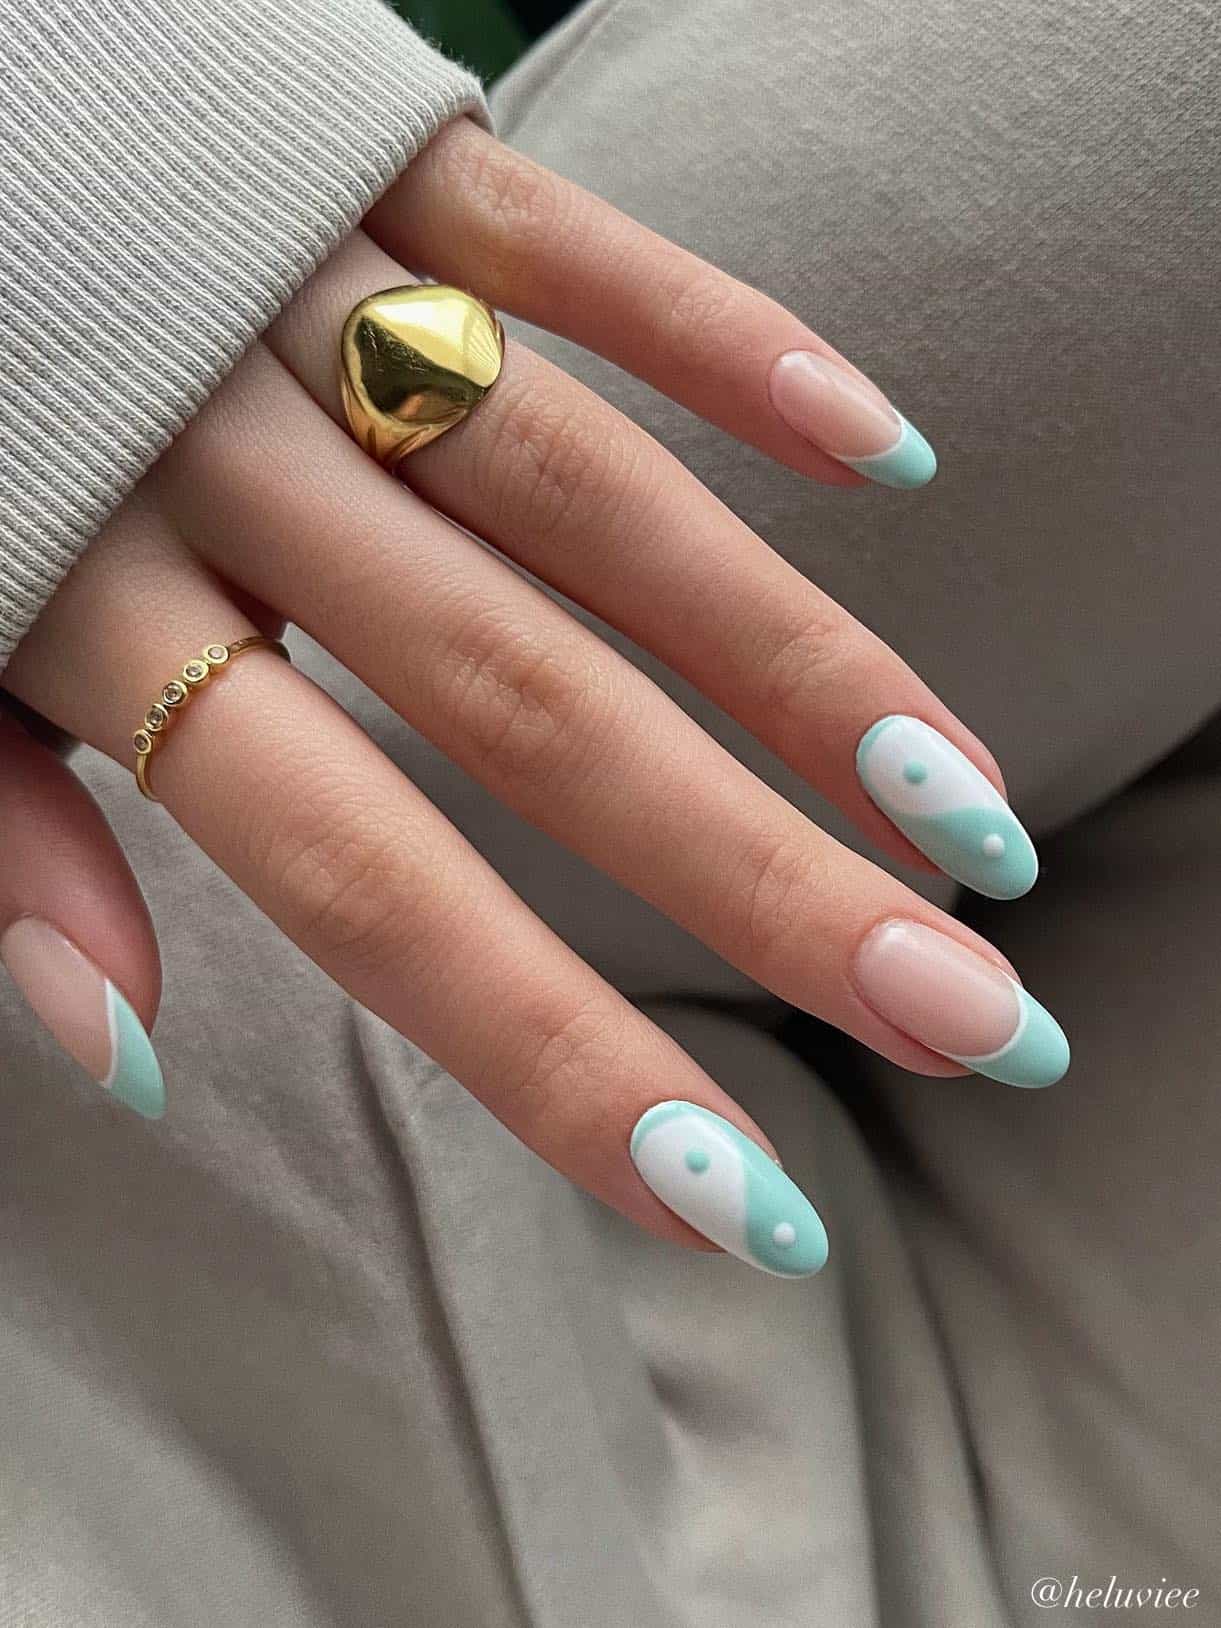 A hand with medium almond nails painted a glossy nude with mint green French tips with white outlines and two accent nails featuring white and mint green yin and yang nail art